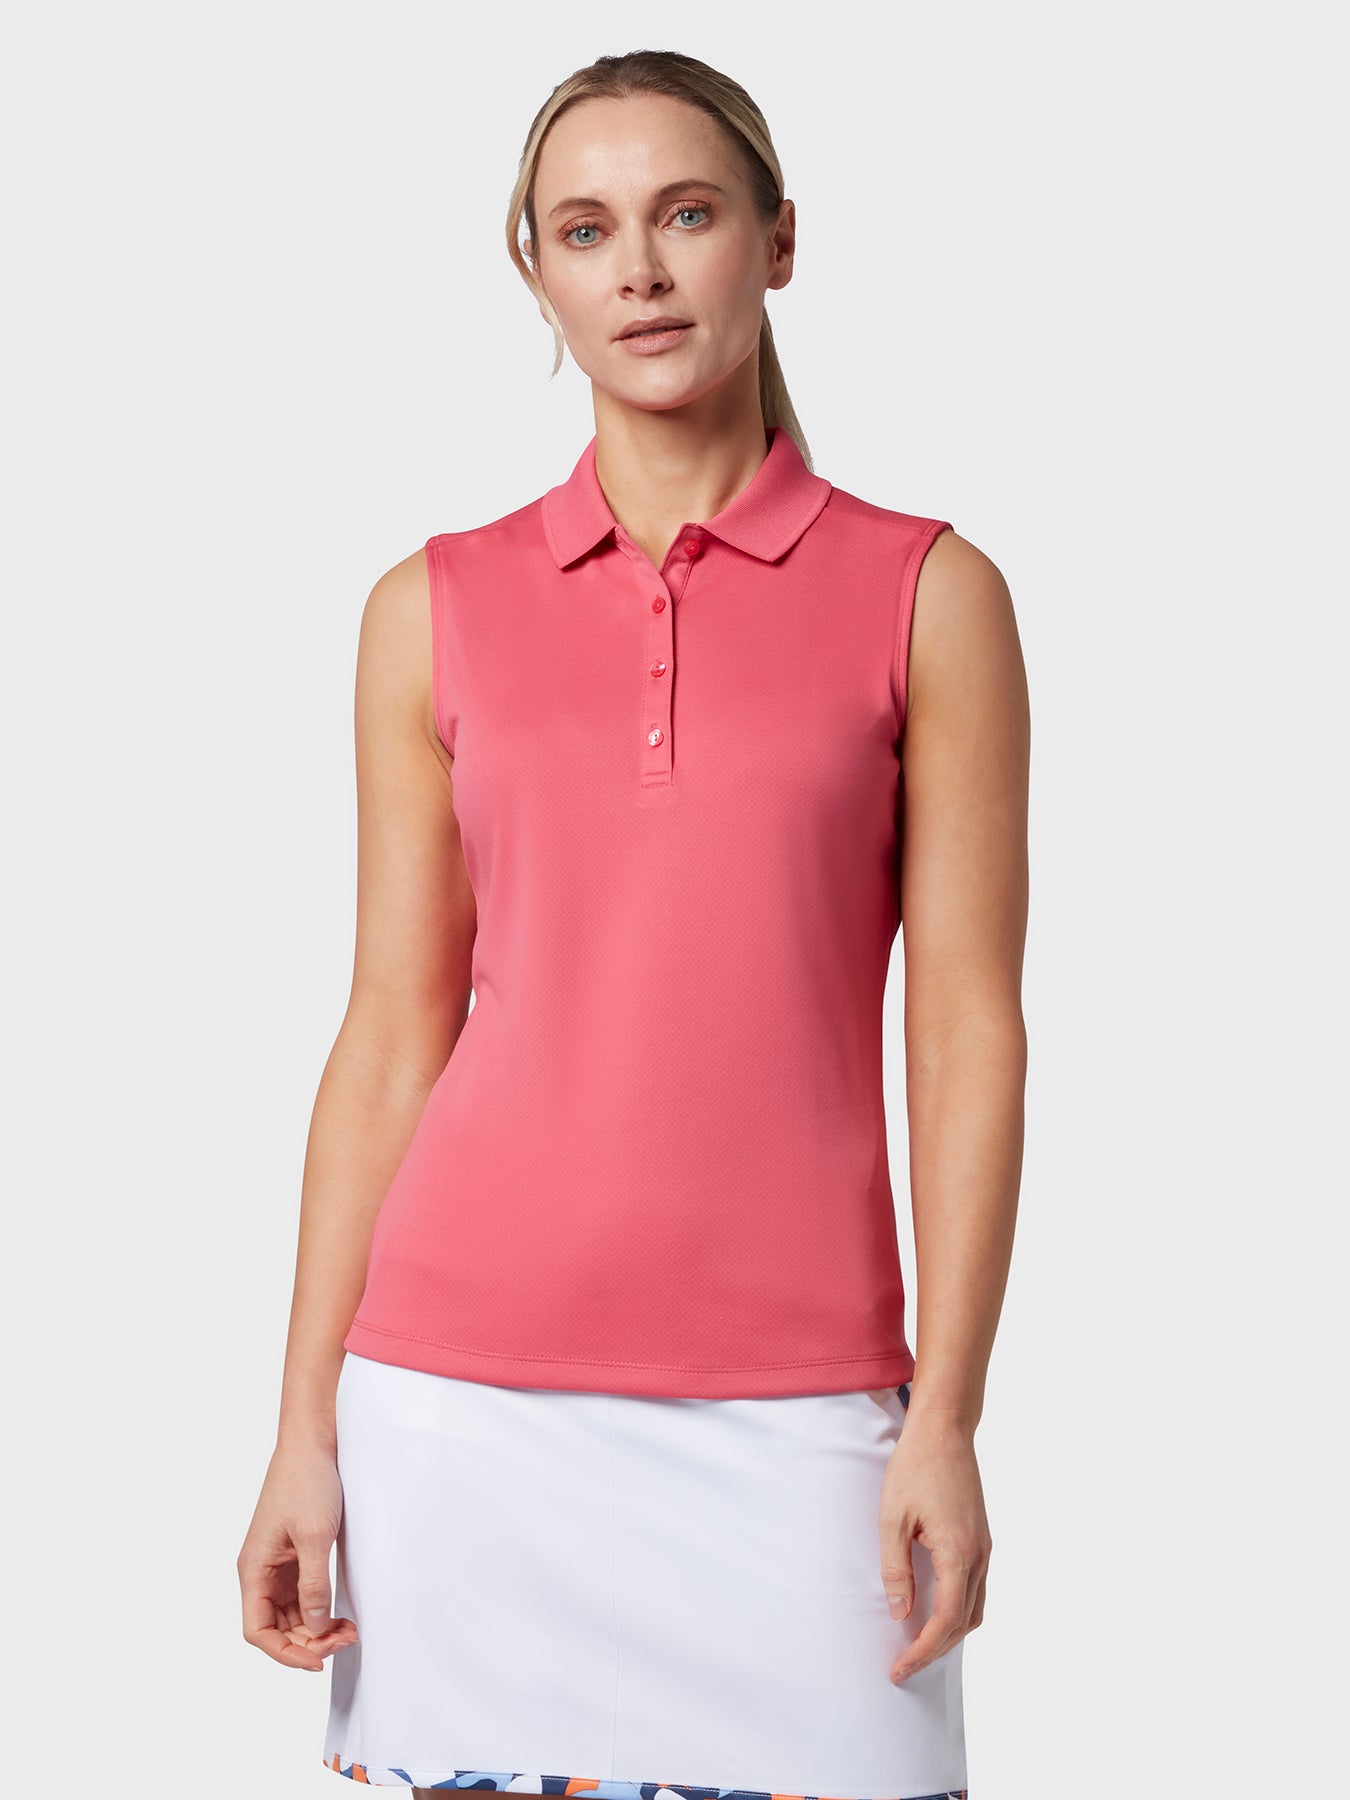 View Sleeveless Womens Polo In Fruit Dove Fruit Dove M information